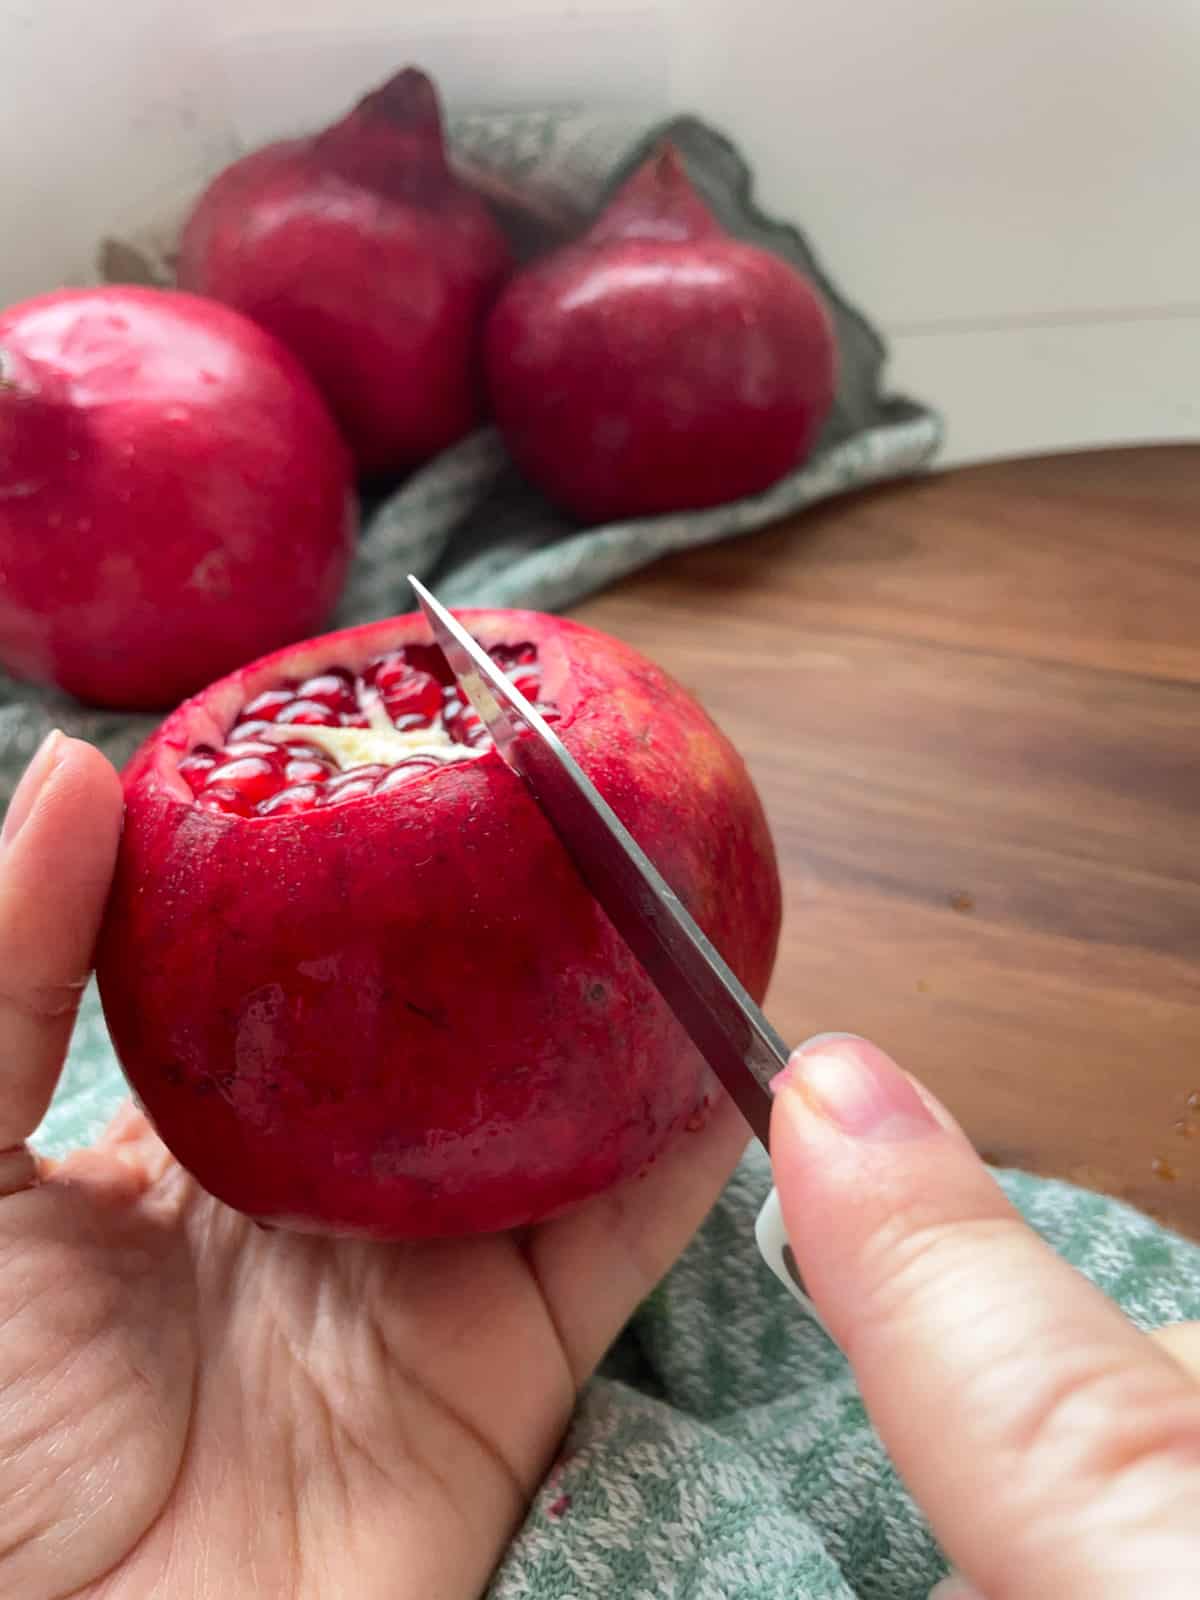 Making cuts along the outside of a pomegranate.